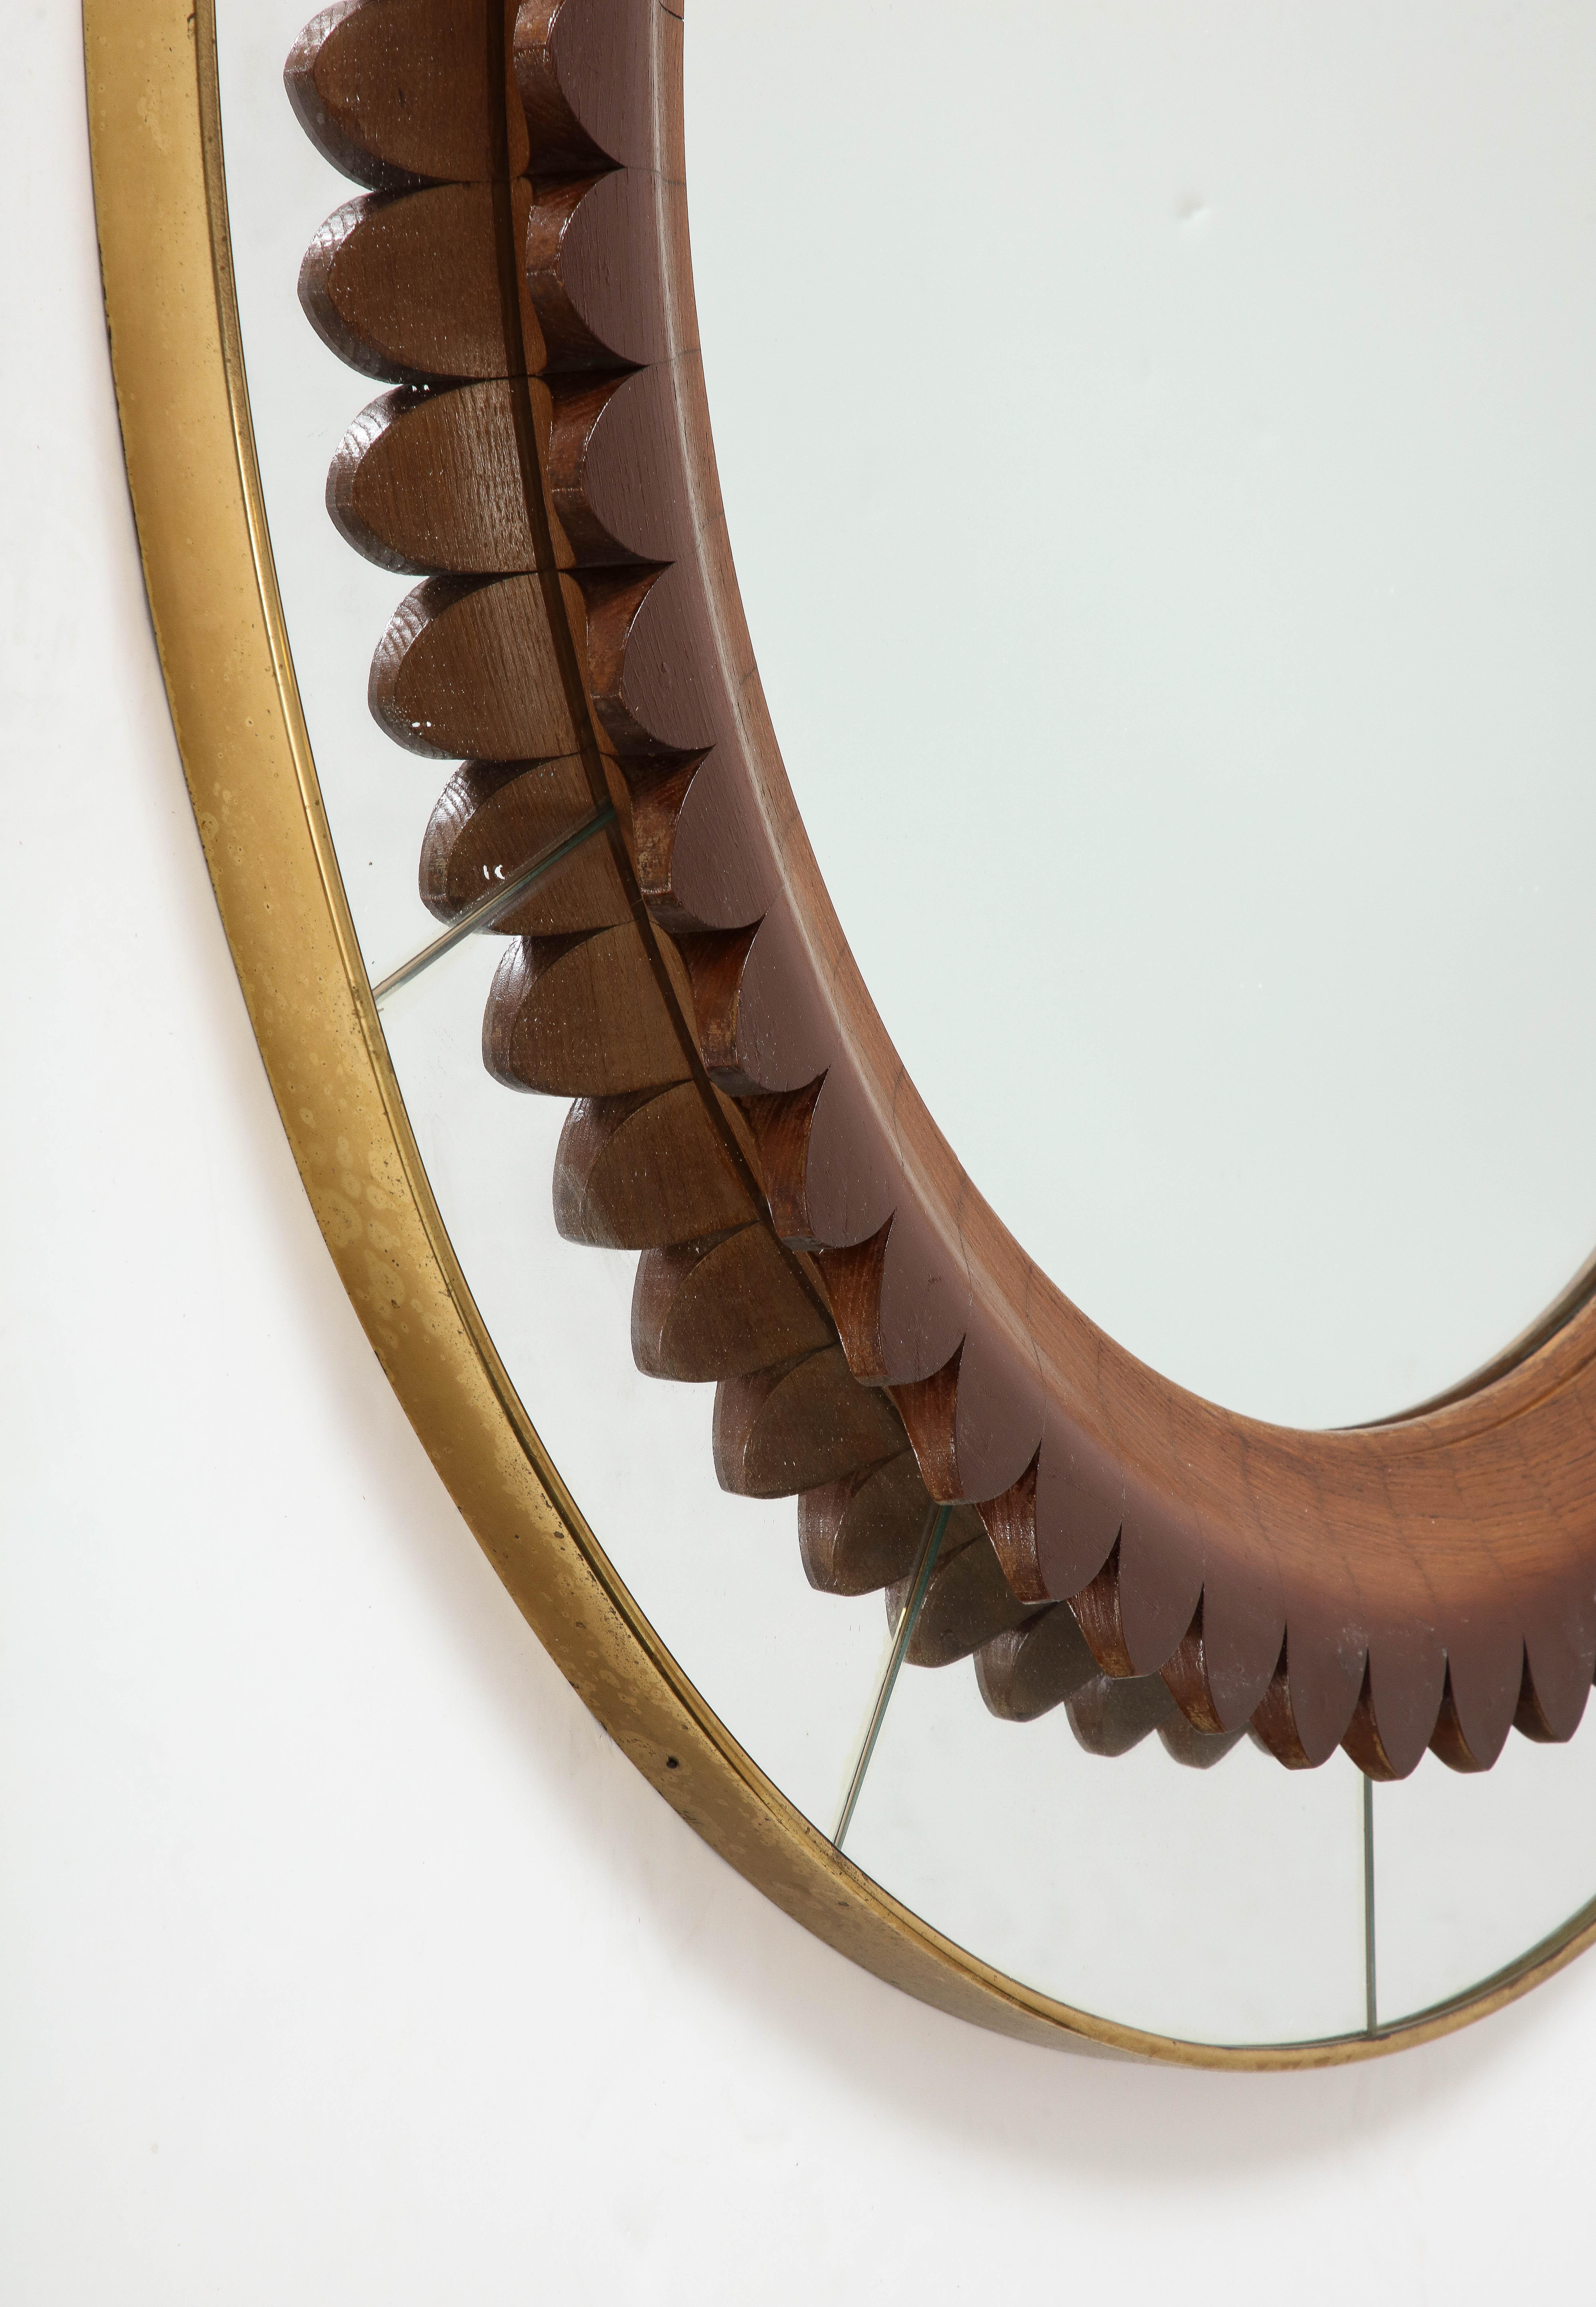 Fratelli Marelli Rare Round Carved Walnut and Brass Wall Mirror, Italy, 1950s For Sale 1